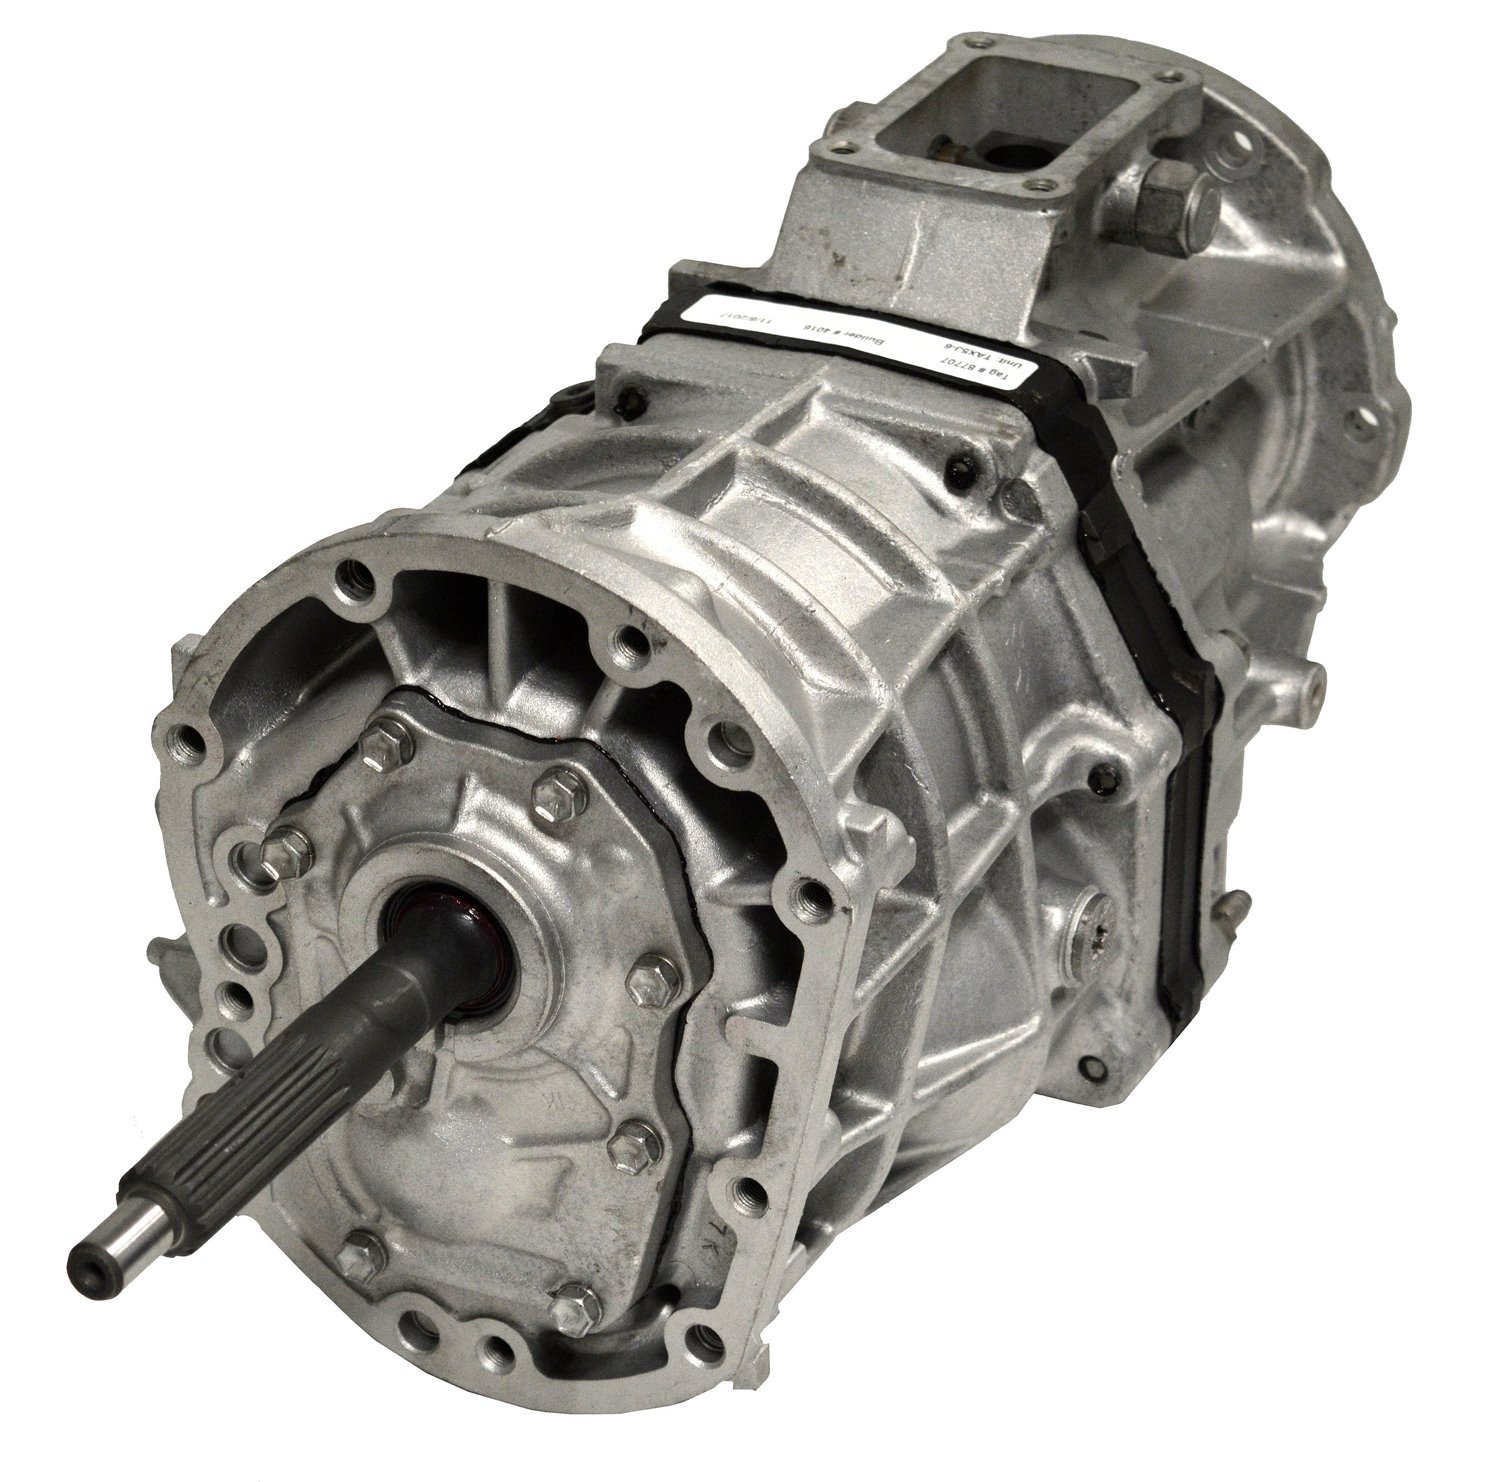 RMTAX5J-4 Remanufactured AX5 Manual Transmission for Jeep 1994-1995 Wrangler, 5-Speed